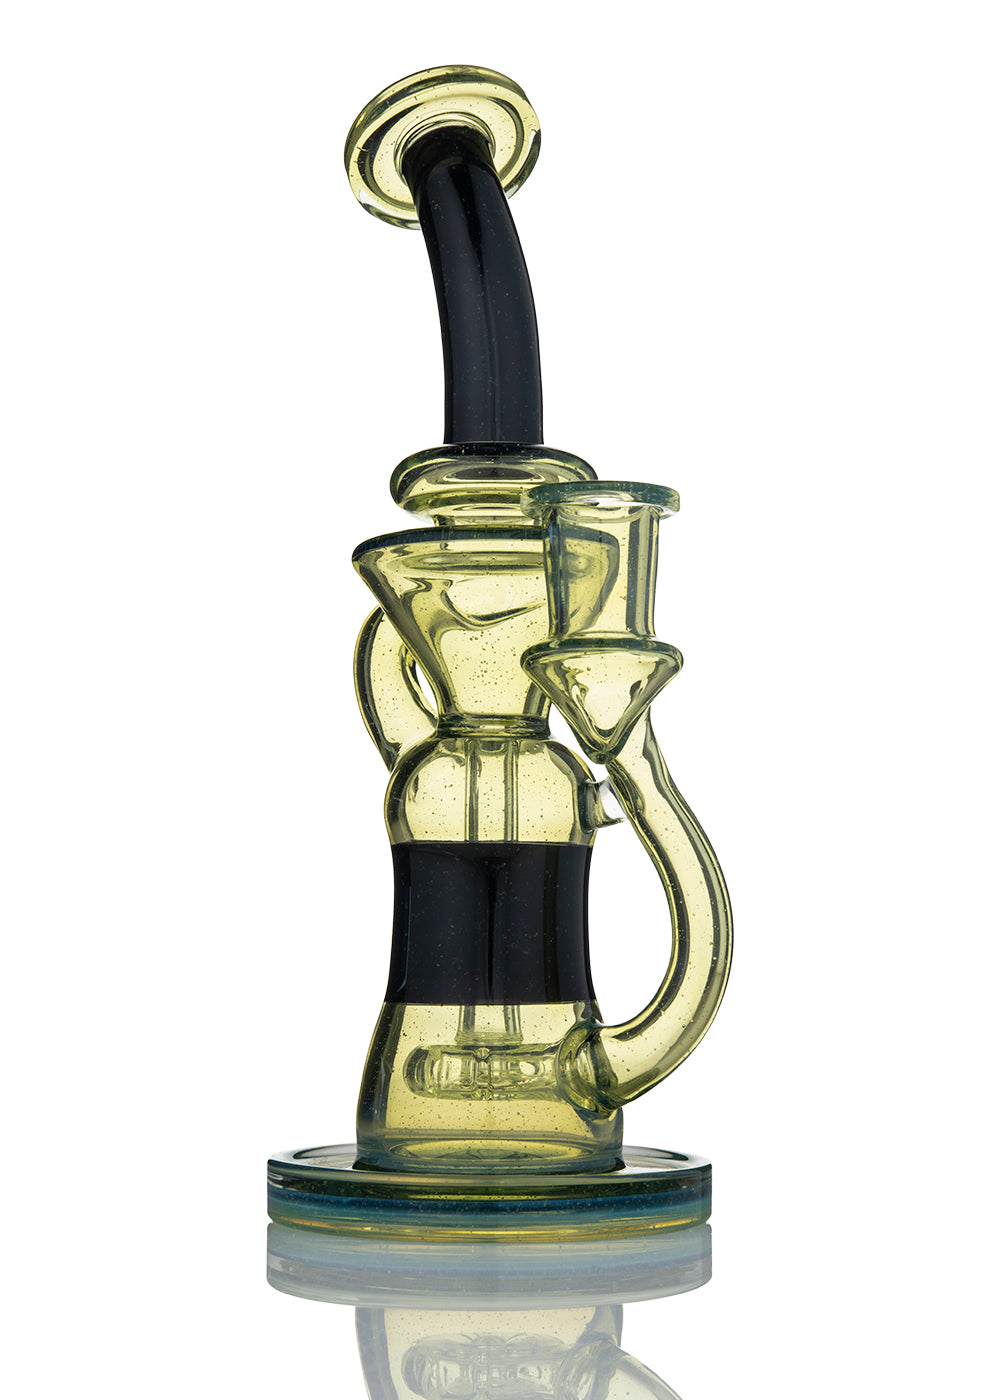 Crushed Opal Recycler with Color Drain, Foot, and Mouthpiece in CFL and UV by Michael Downs (Mike D Glass)